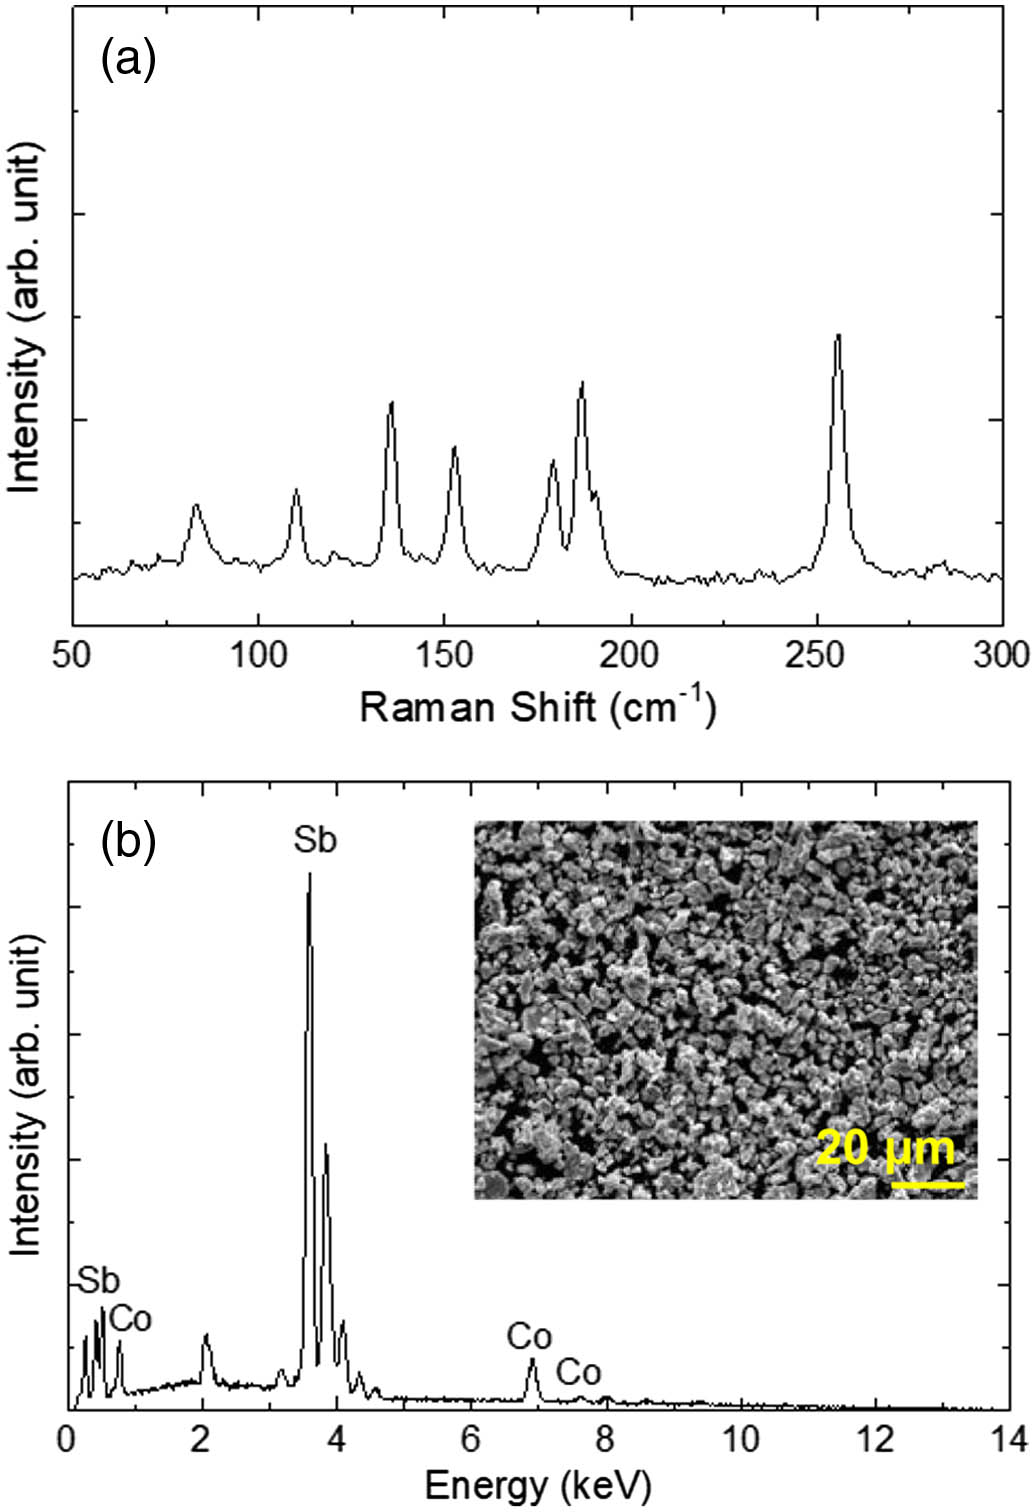 Measured (a) Raman spectrum and (b) energy-dispersive X-ray spectroscopy (EDS) profile of the cobalt antimonide (CoSb3) particle. Inset: measured SEM image of the prepared CoSb3 powder.